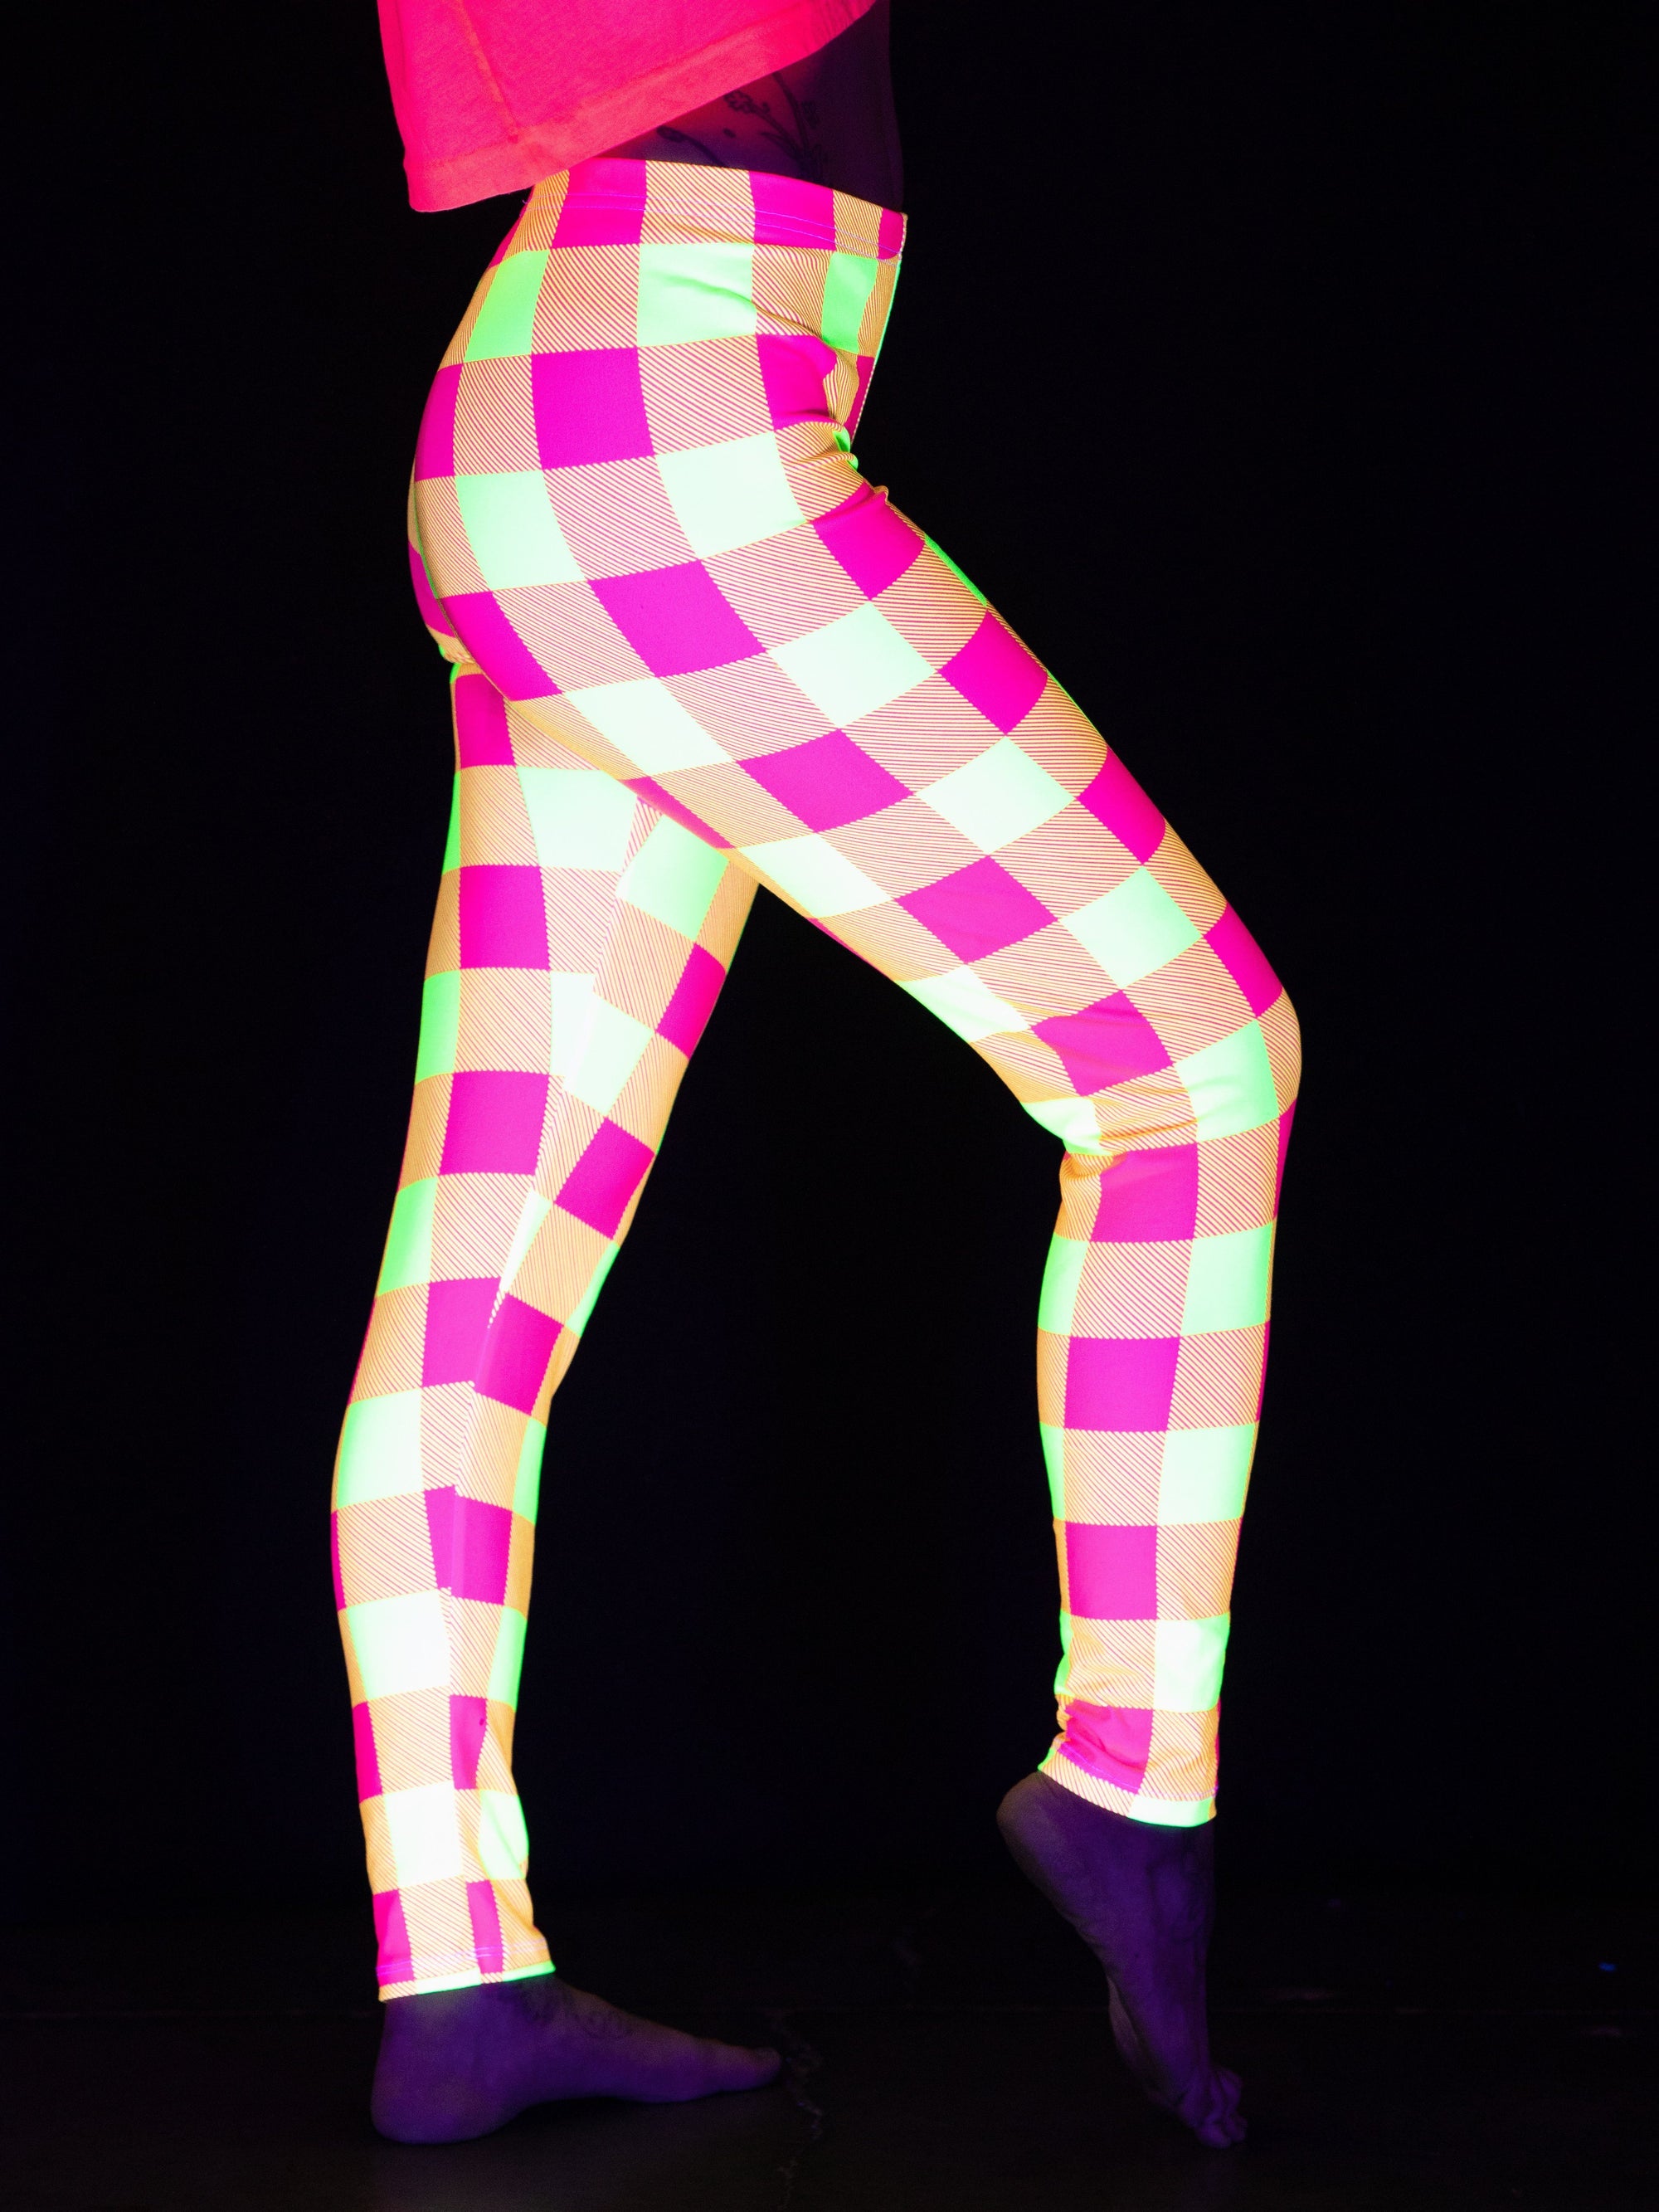 Neon Yellow & Pink Plaid Tights Tights T6 